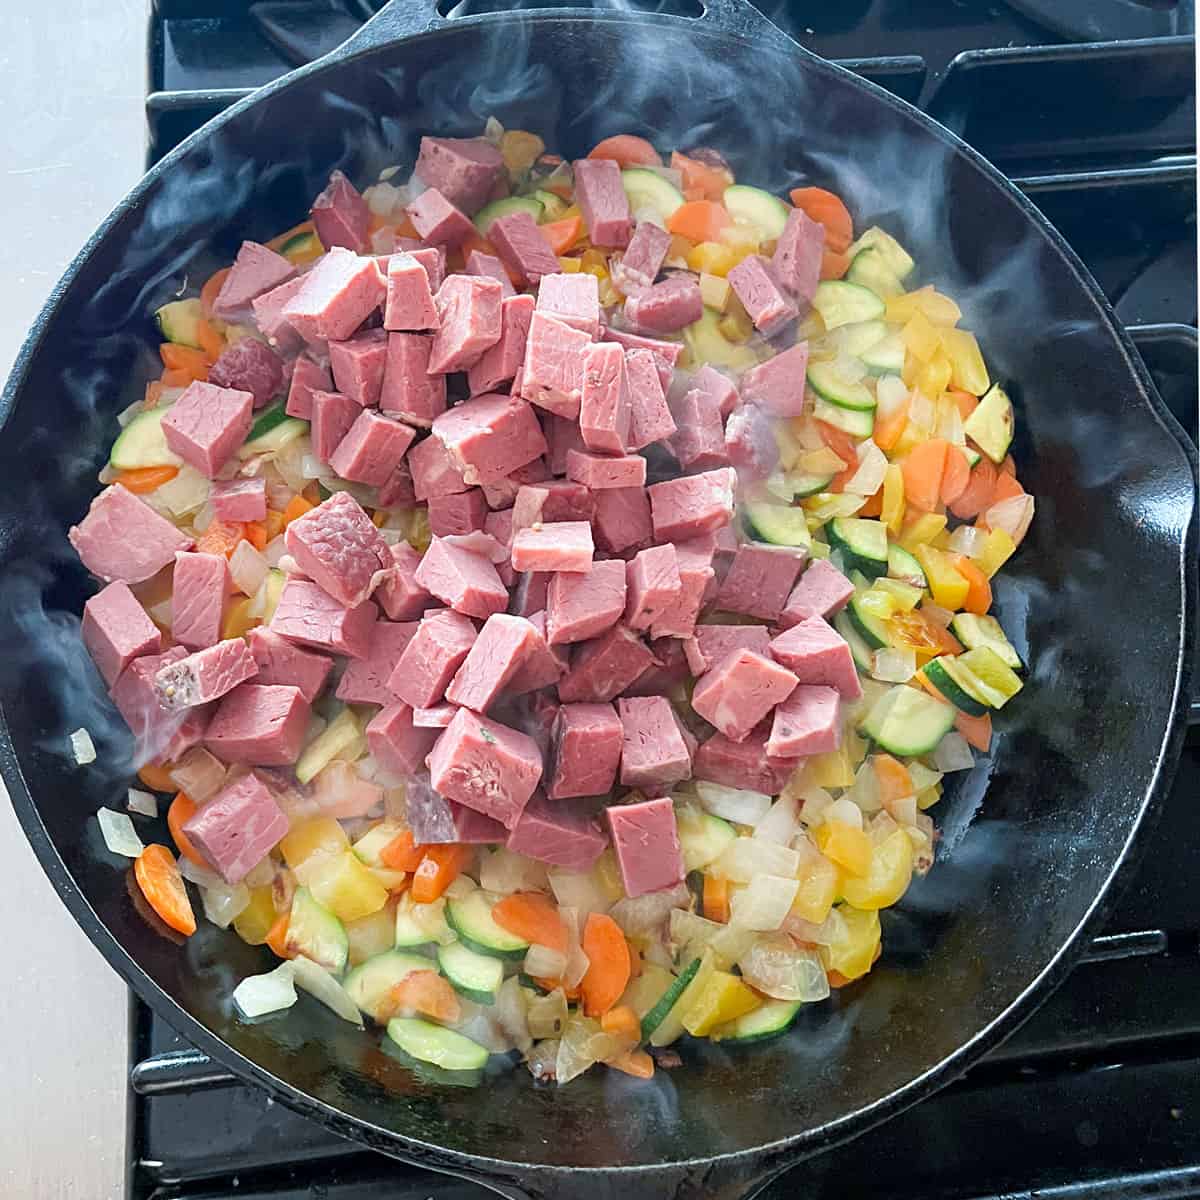 Cubed corned beef on top of sautéed veggies, in a cast iron skillet.